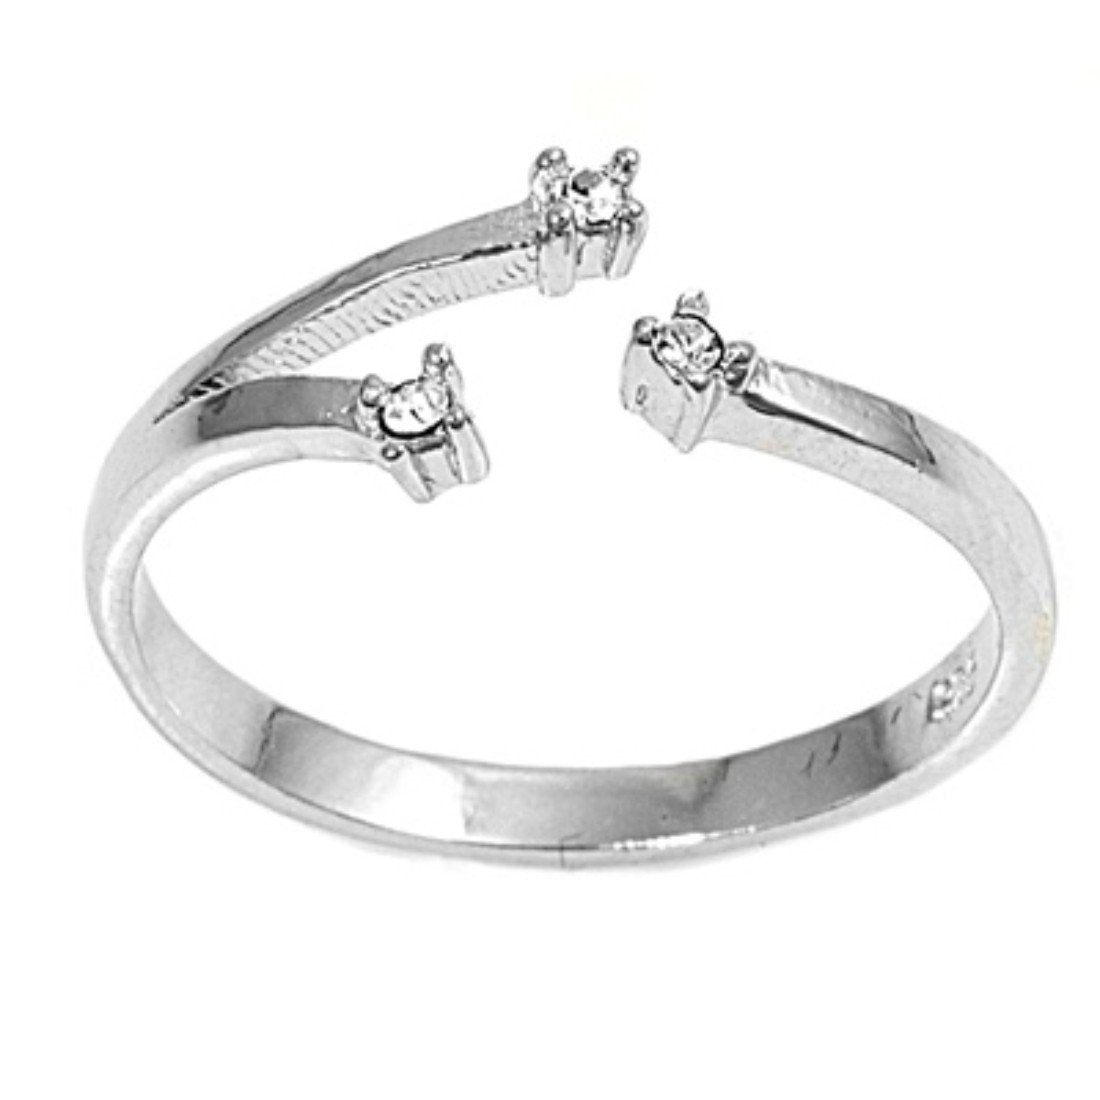 Silver Toe Ring Simulated Cubic Zirconia Adjustable Band 925 Sterling Silver (7mm)